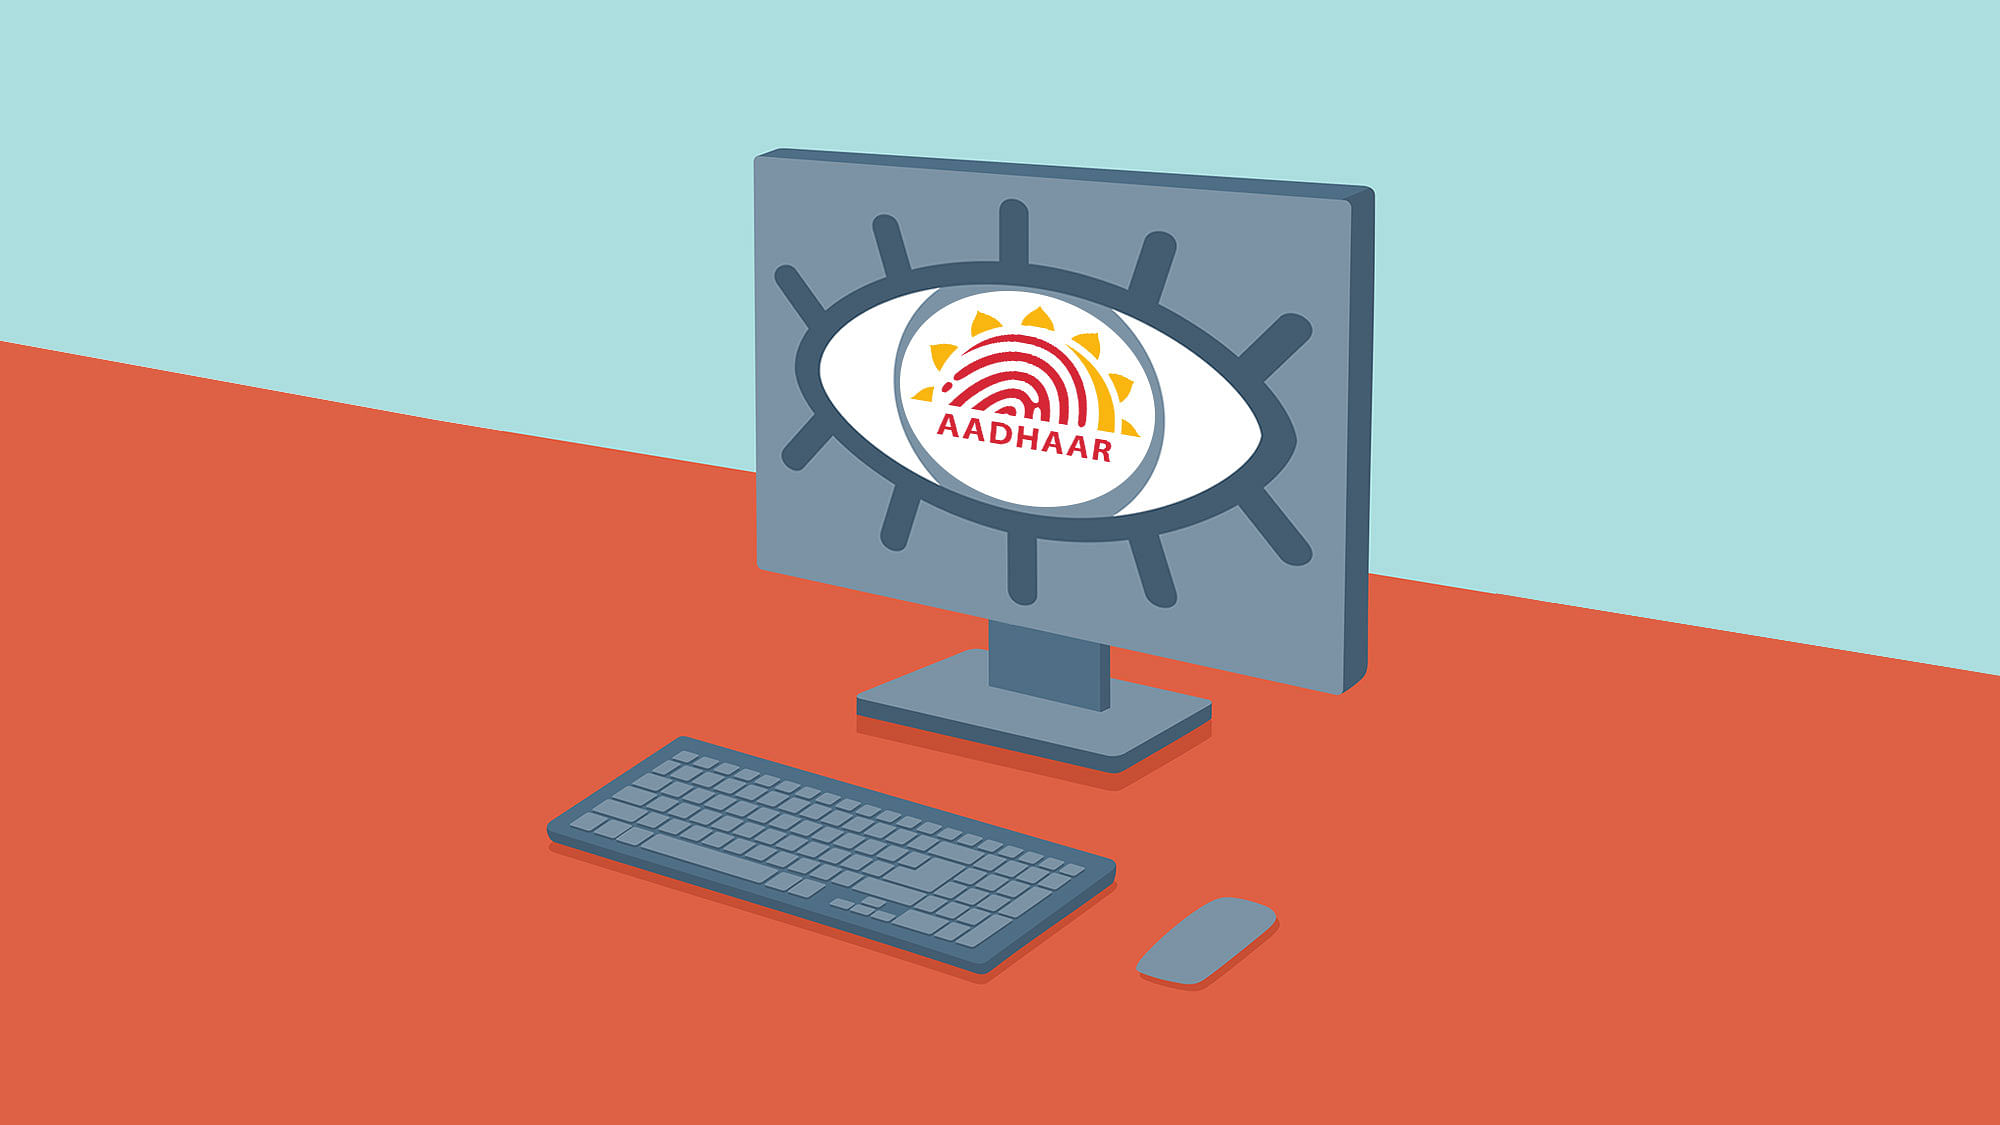 A major concern is that the Aadhaar Act, 2016 strips citizens of their right to report criminal activities and breaches concerning Aadhaar. (Photo: iStock/Altered by <b>The Quint</b>)